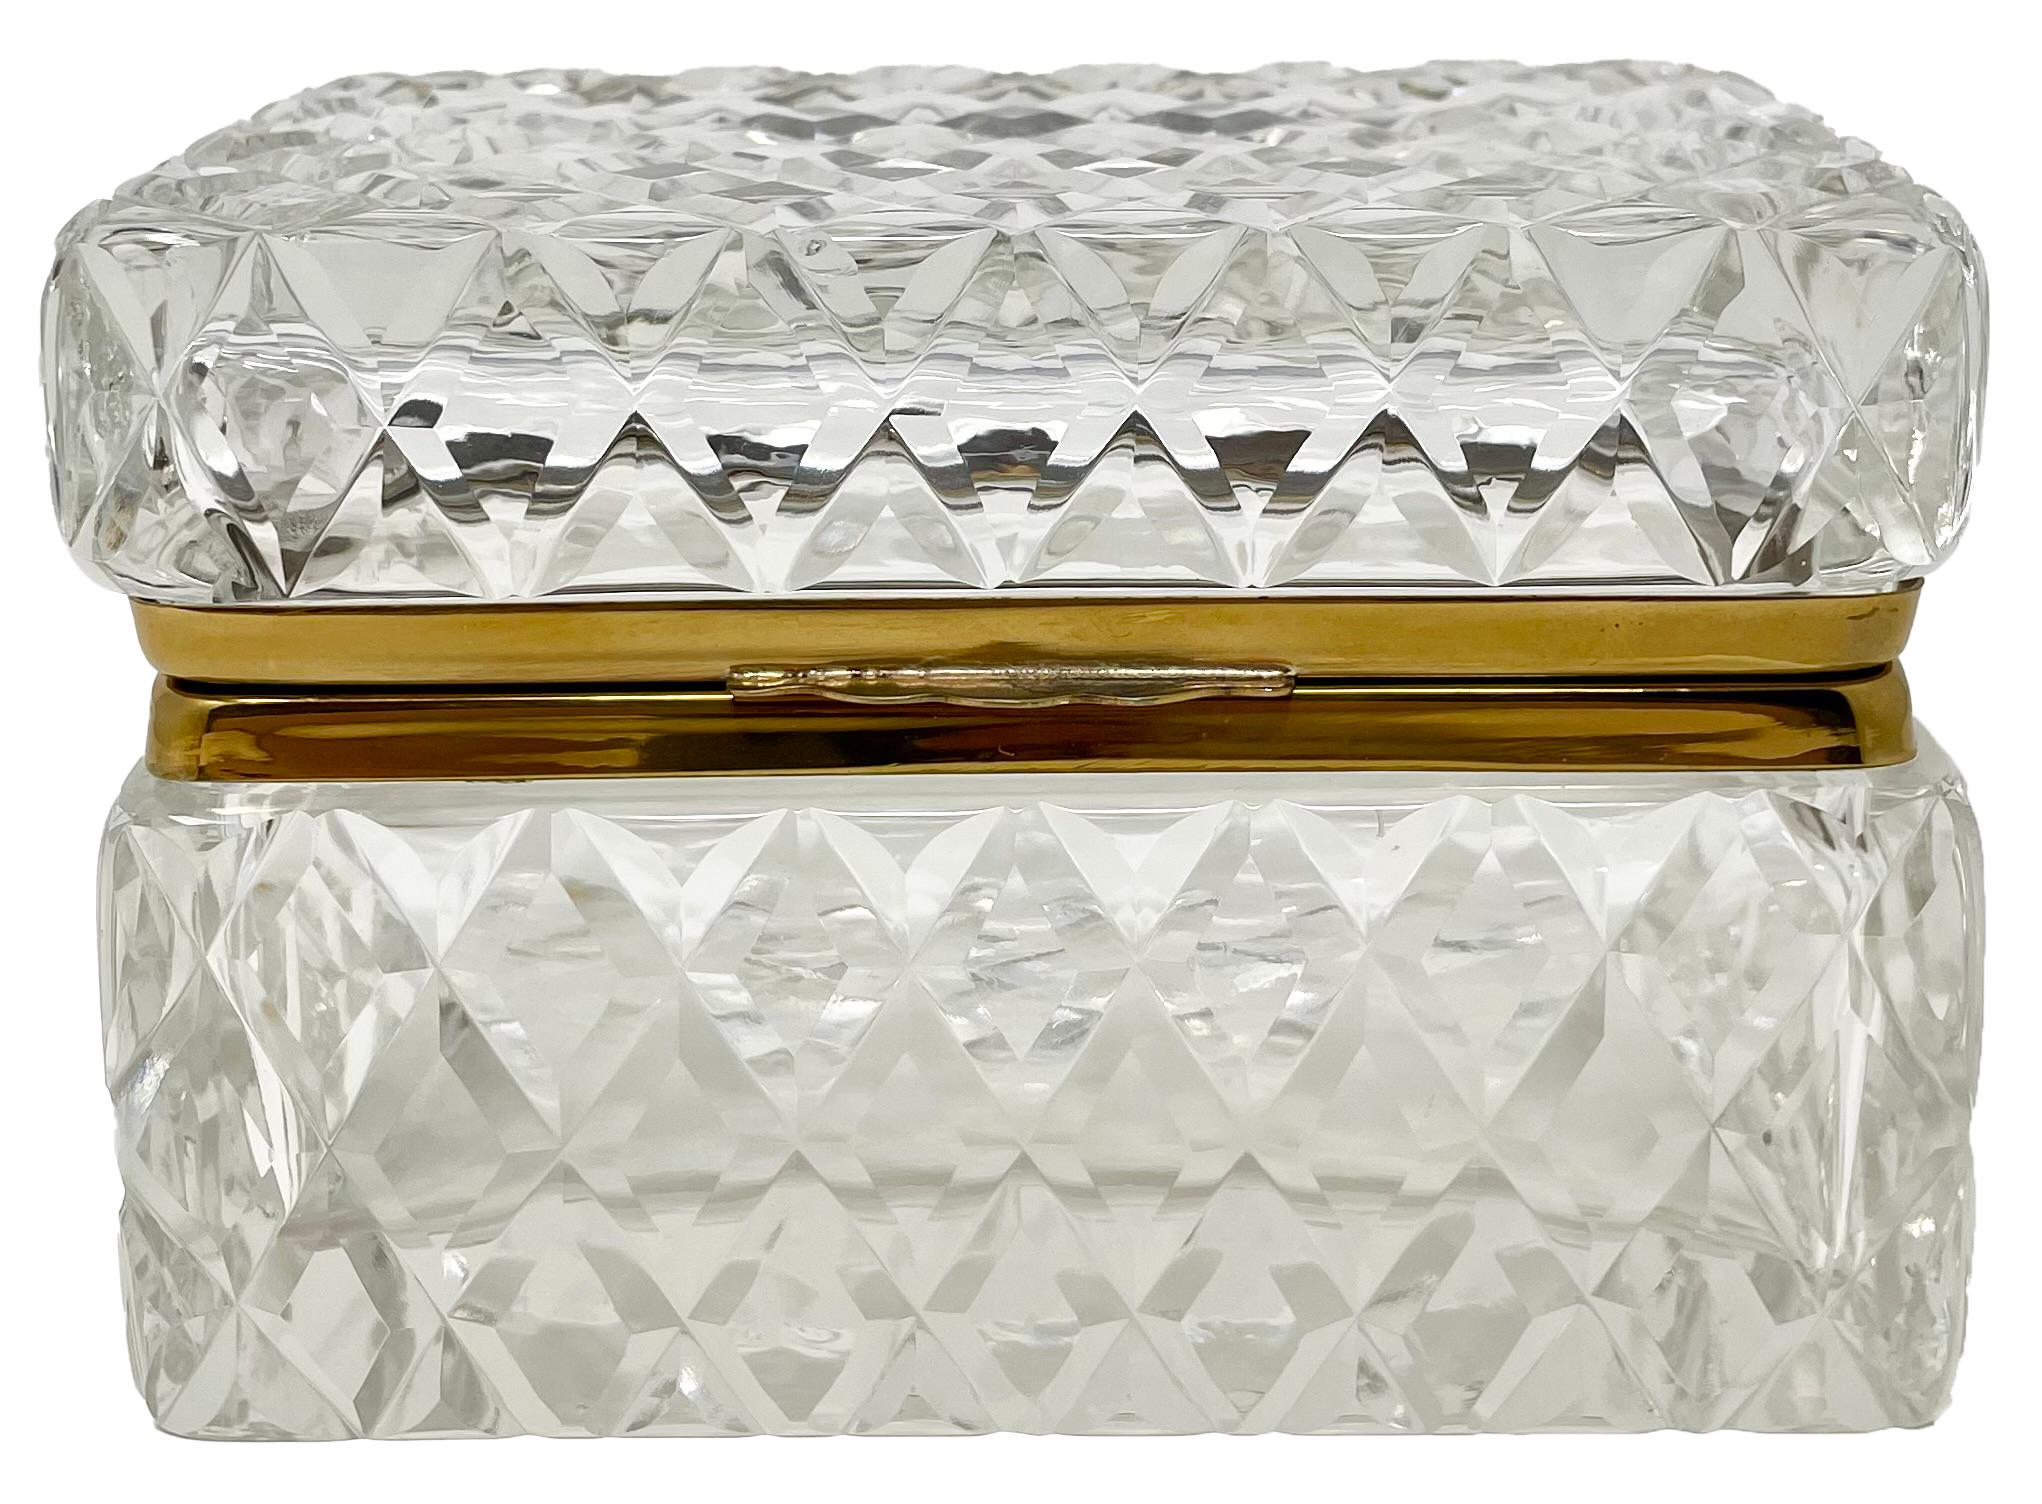 Antique French Cut Crystal and Gold Bronze Box, Circa 1890.
